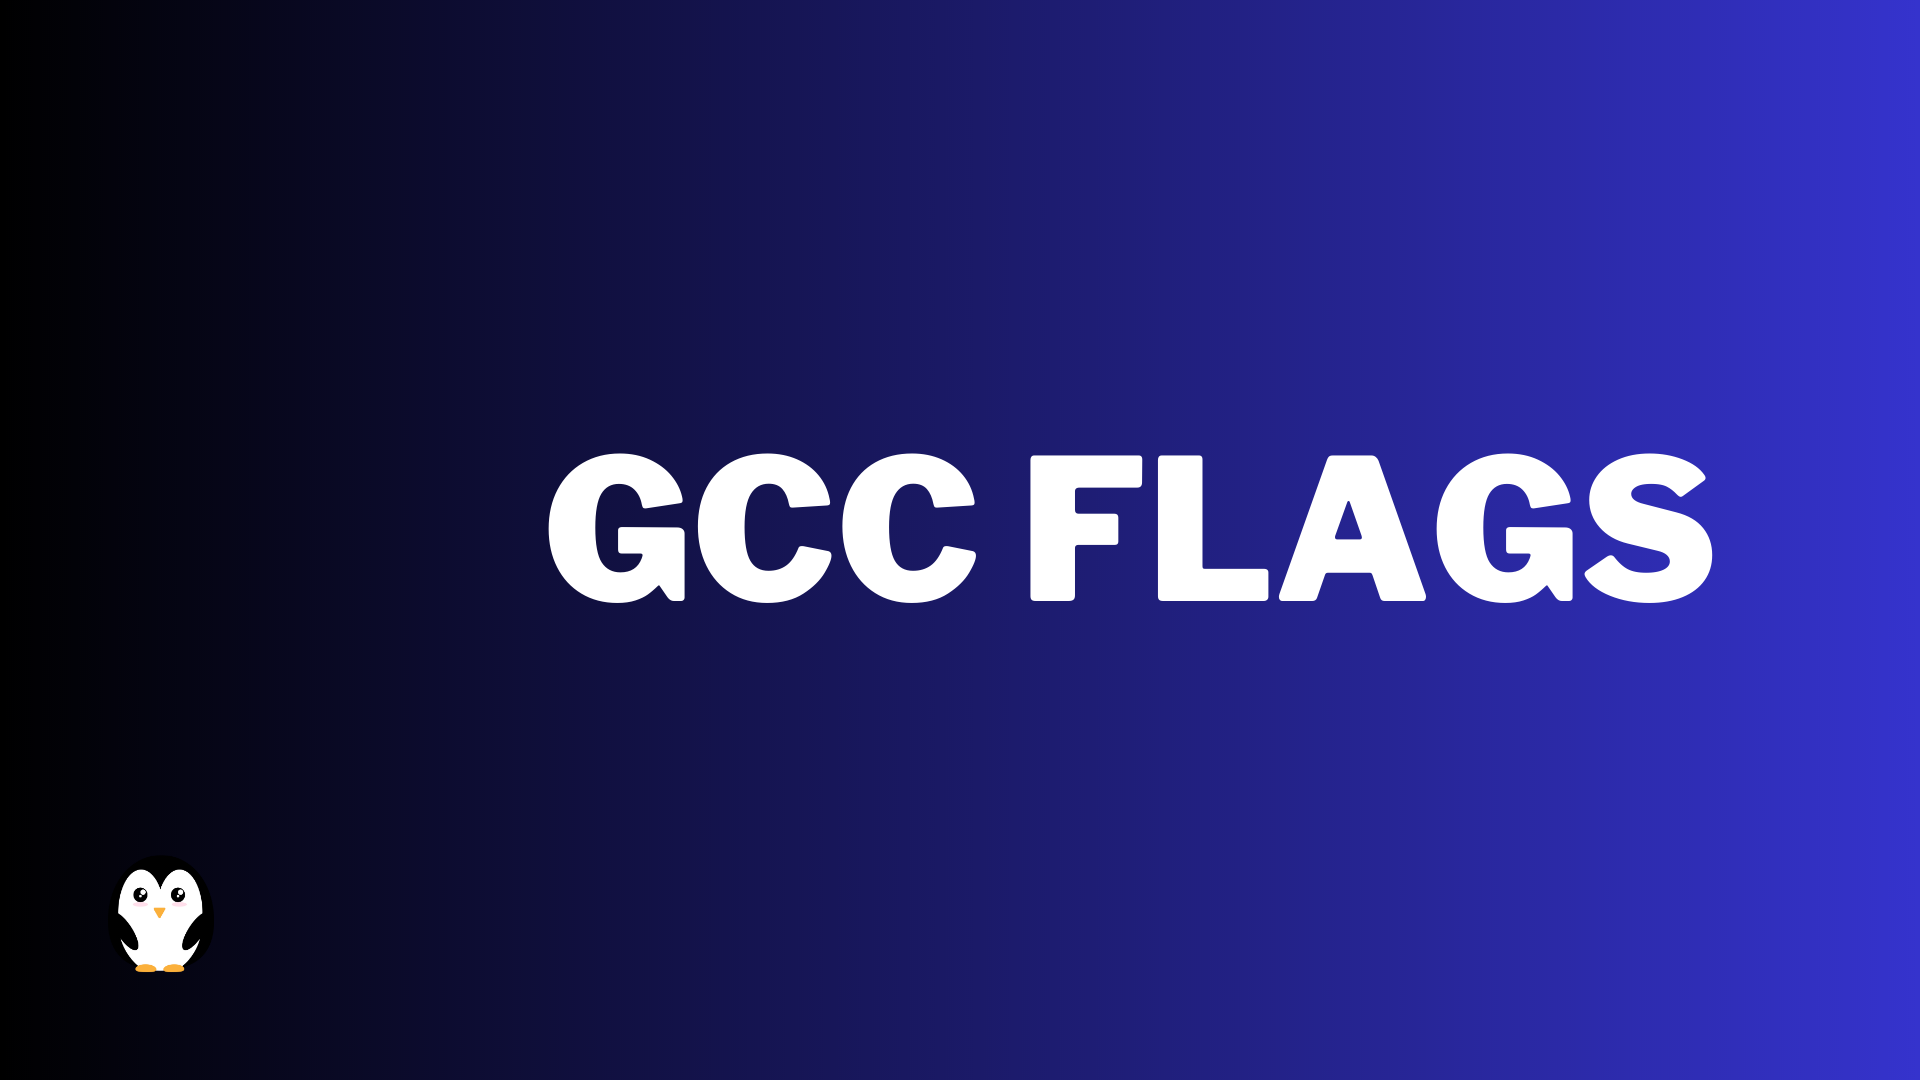 GCC Flags in Linux